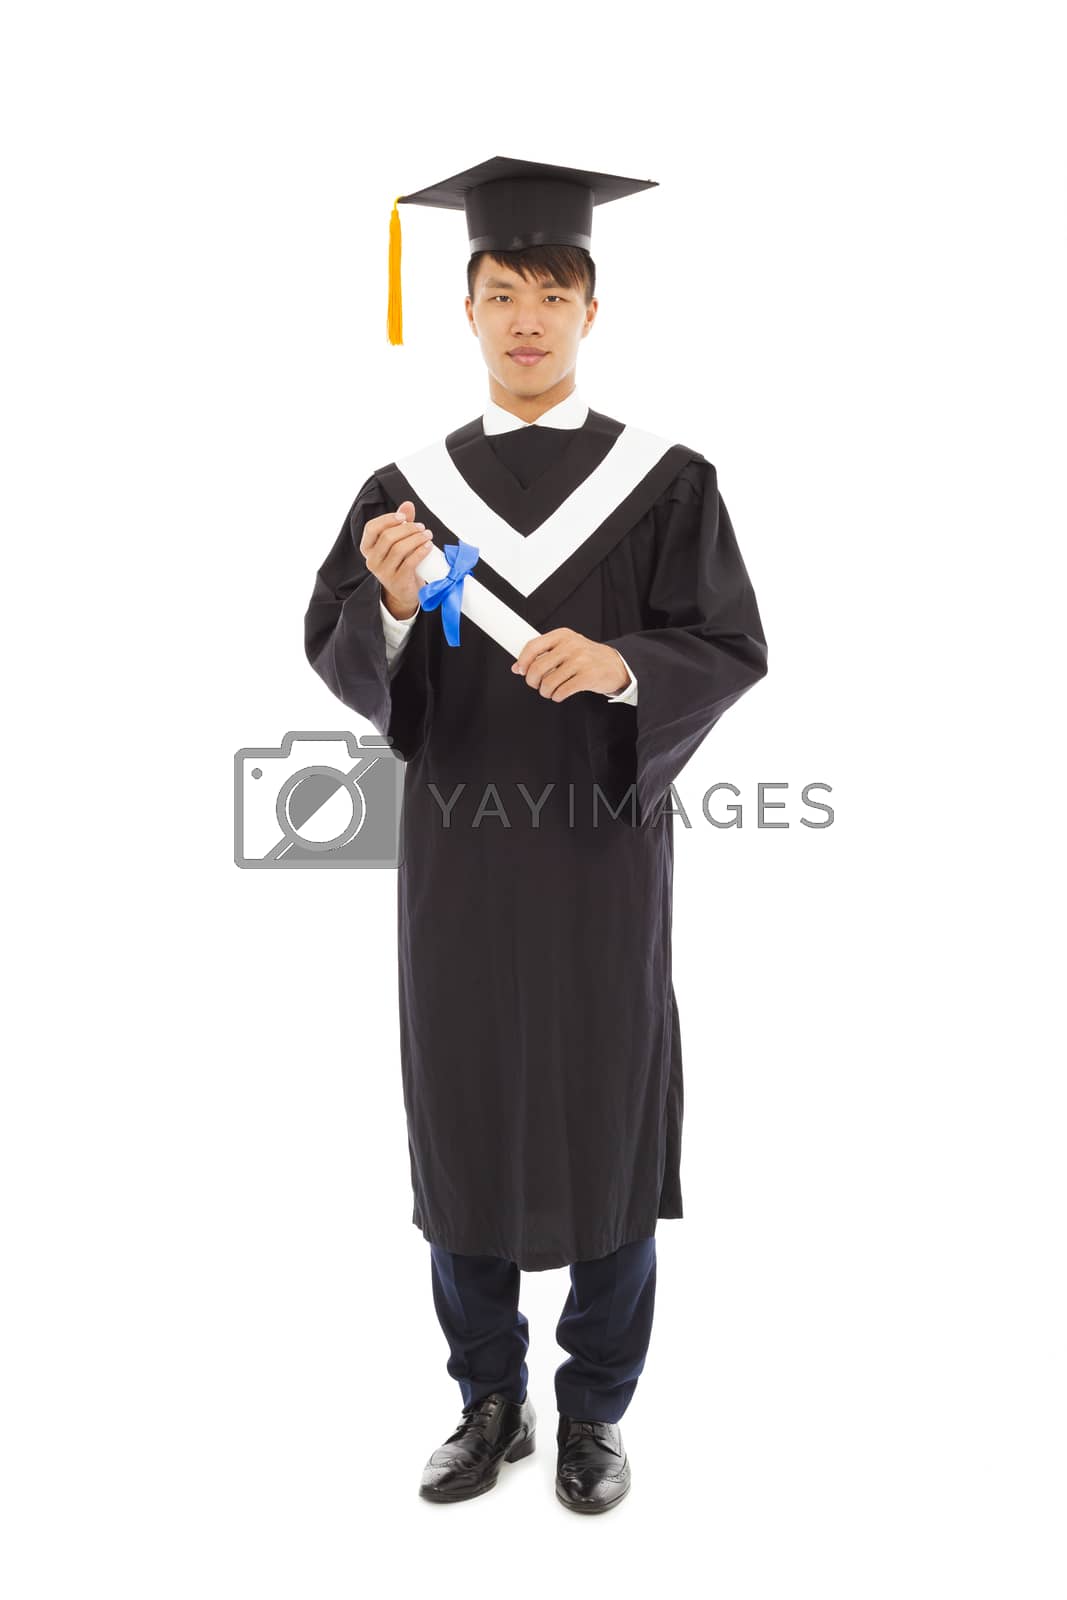 Royalty free image of Portrait of happy graduating student by tomwang